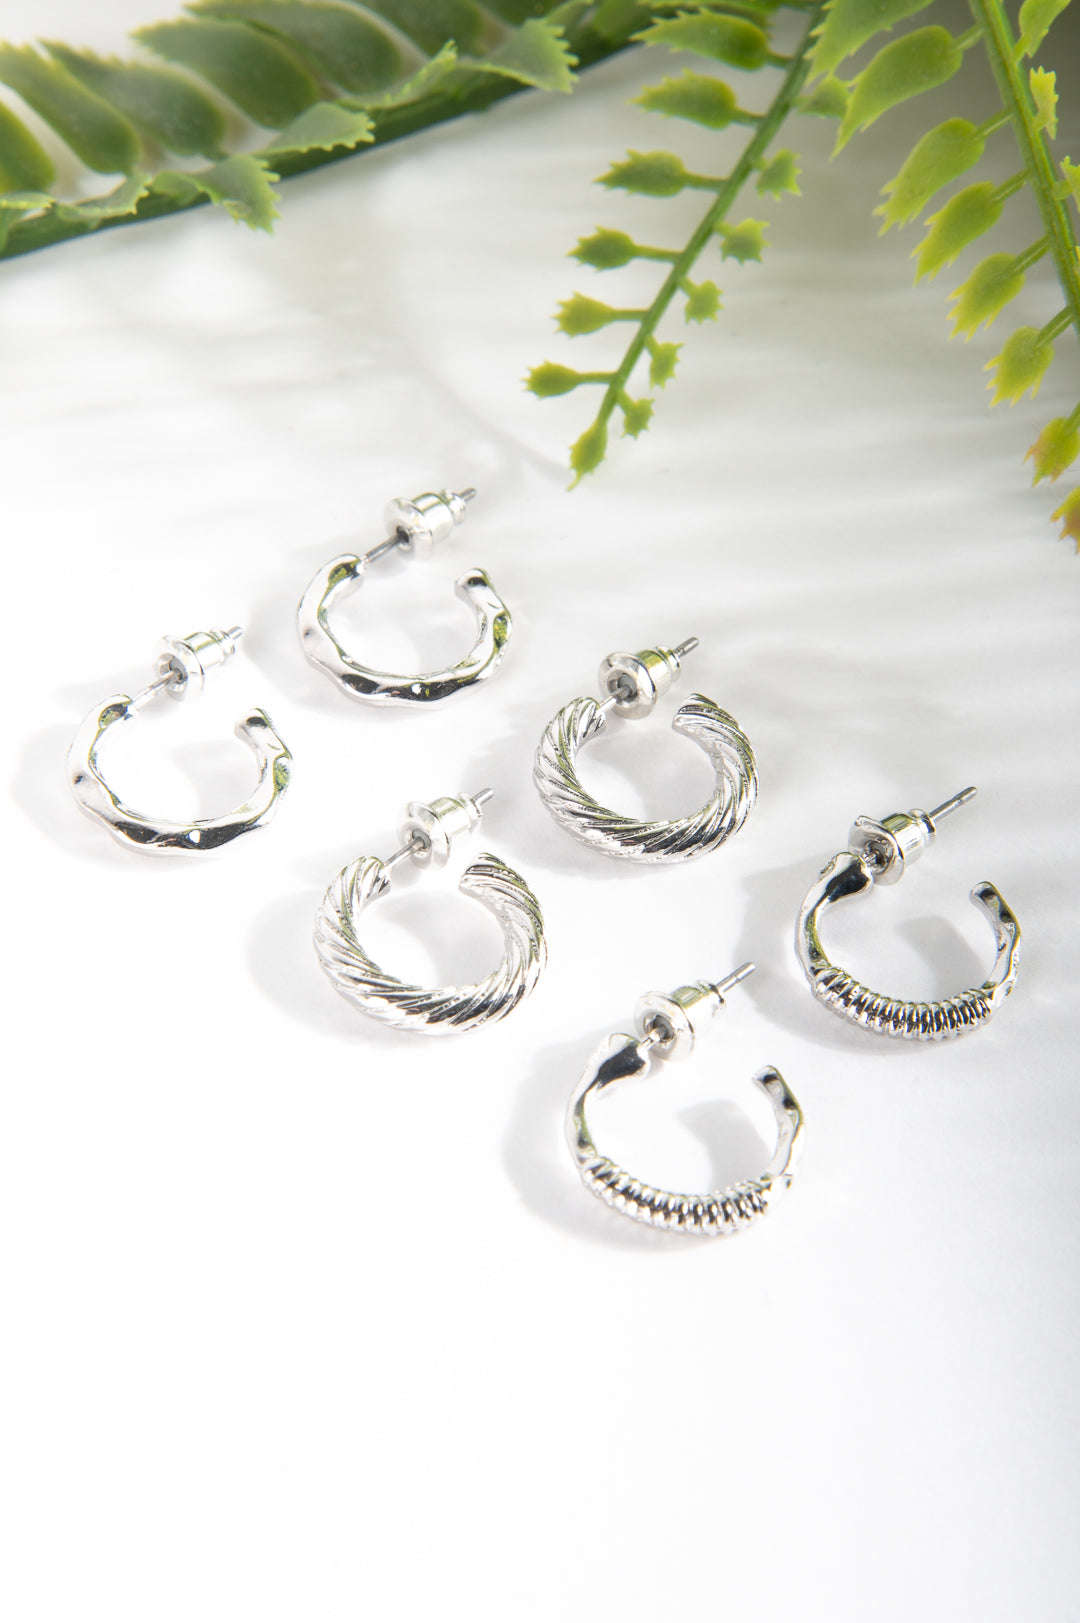 Ohrring Set in Silber